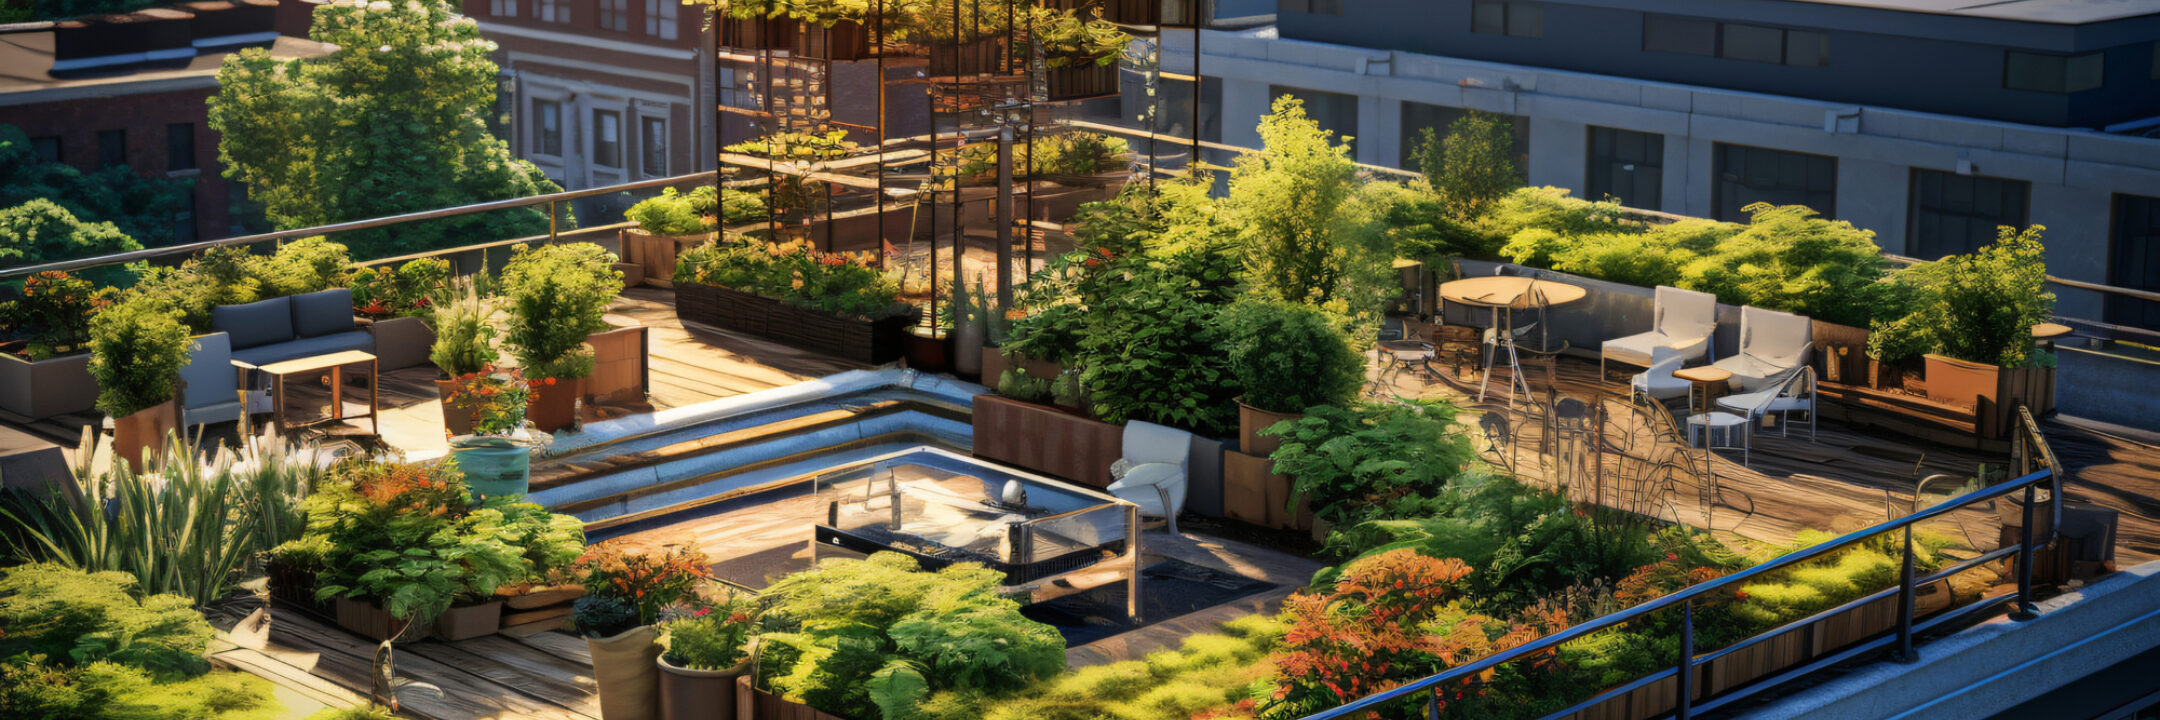 Jets Image Roofgarden City Stock 630153576 small